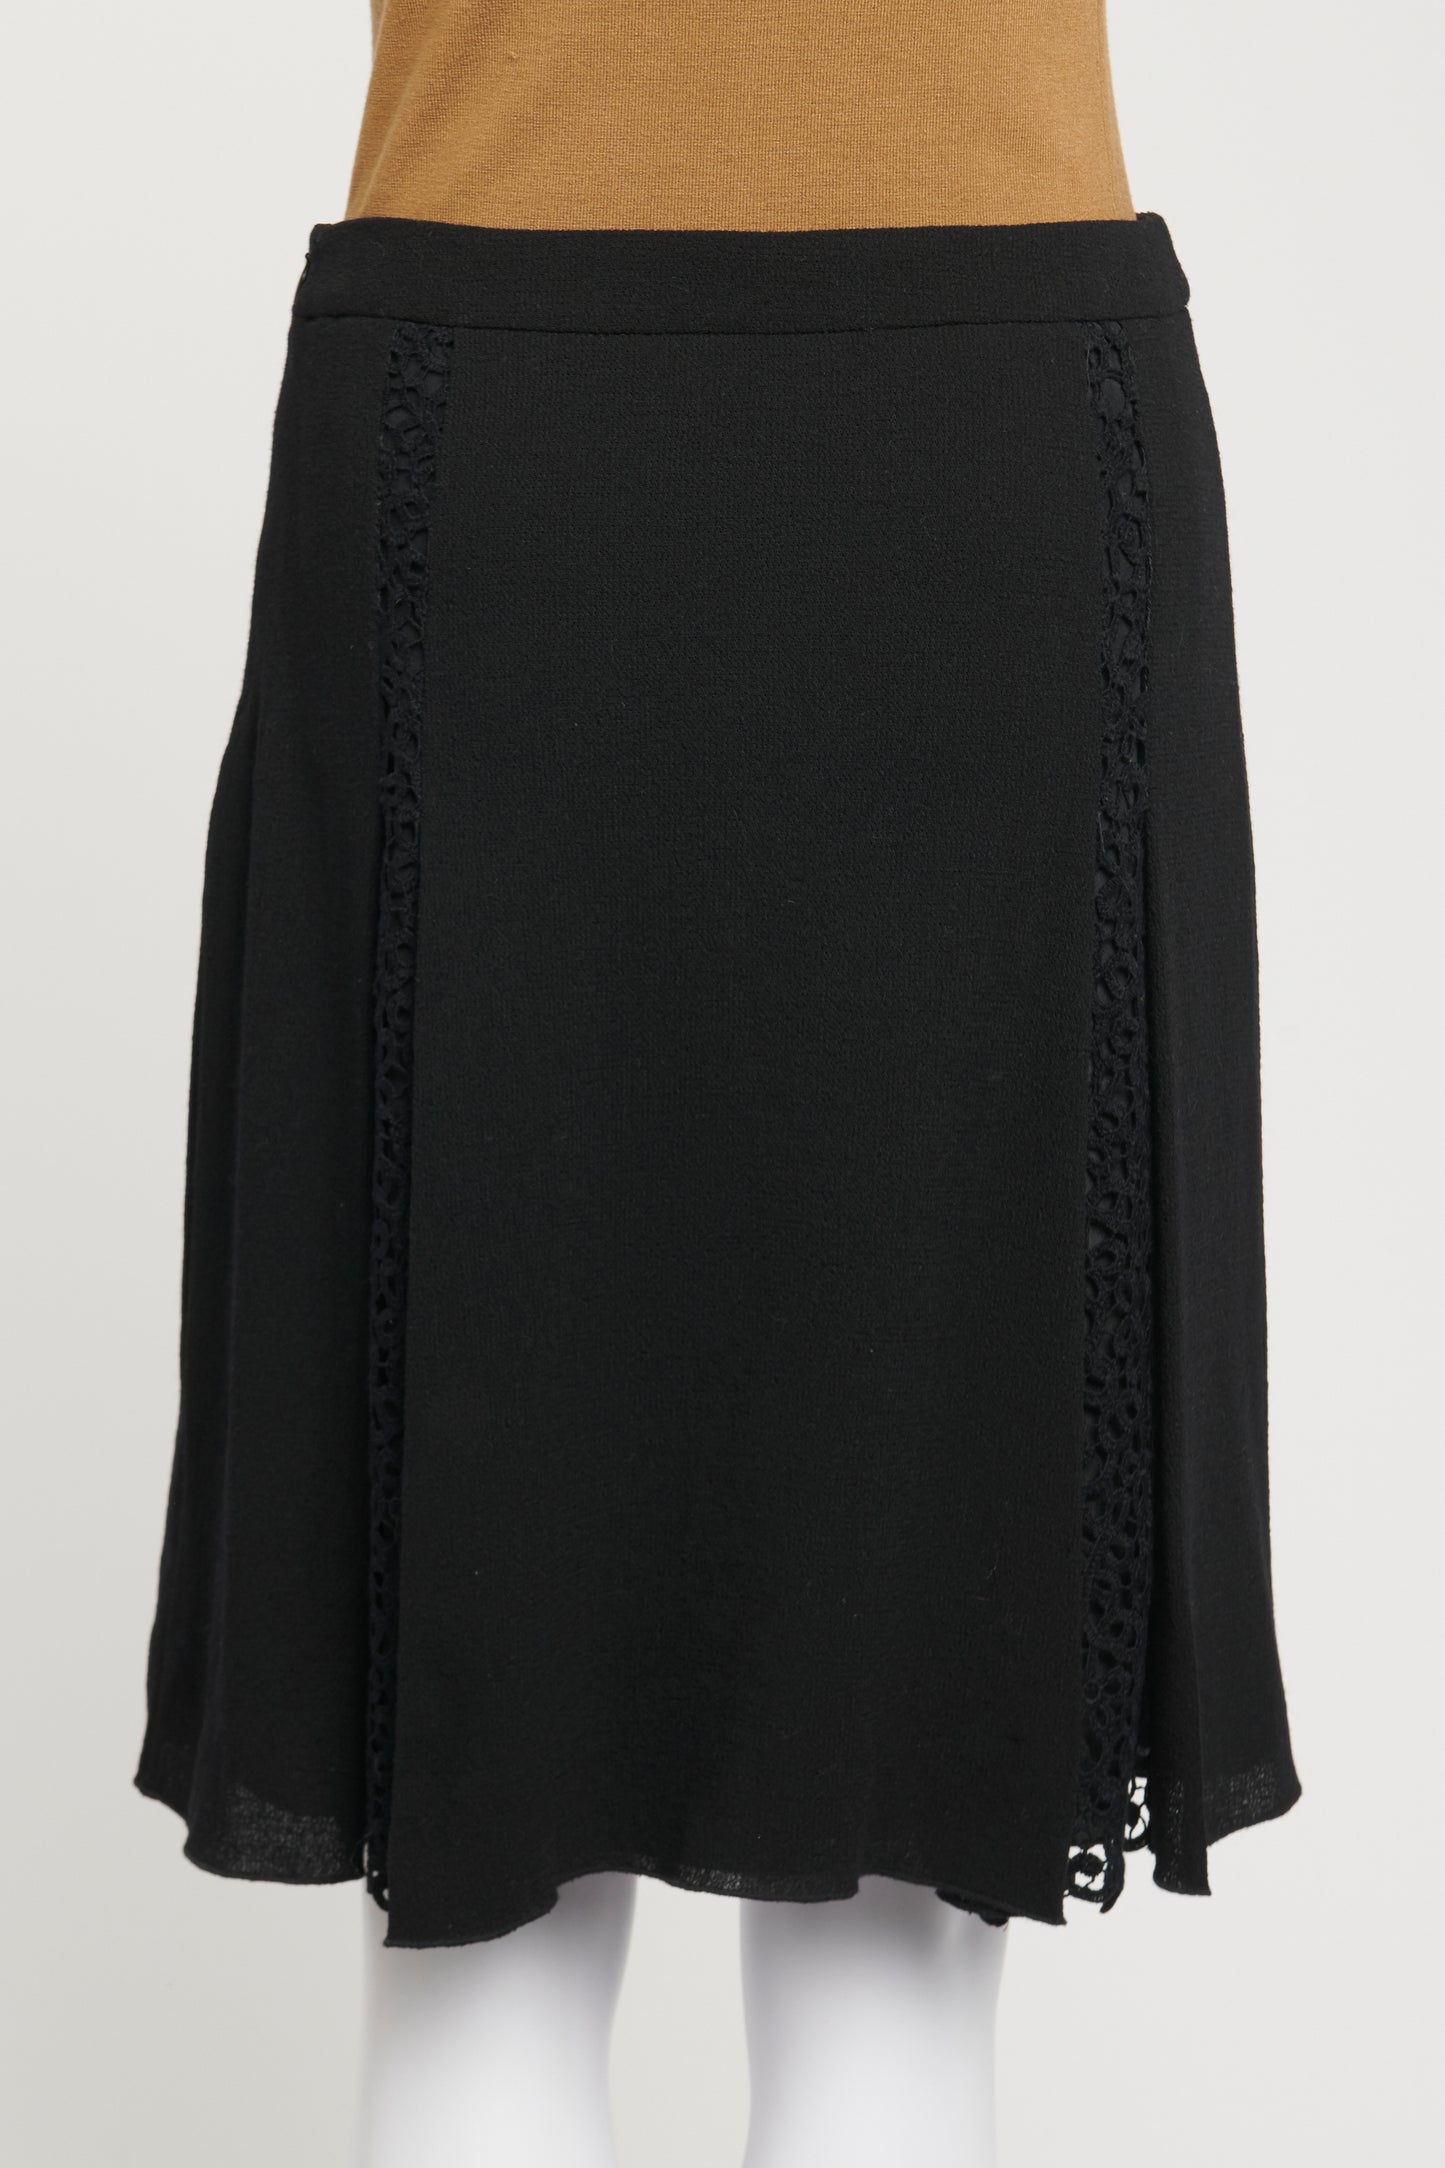 2000's Black Wool Preowned A-Line Mini Skirt